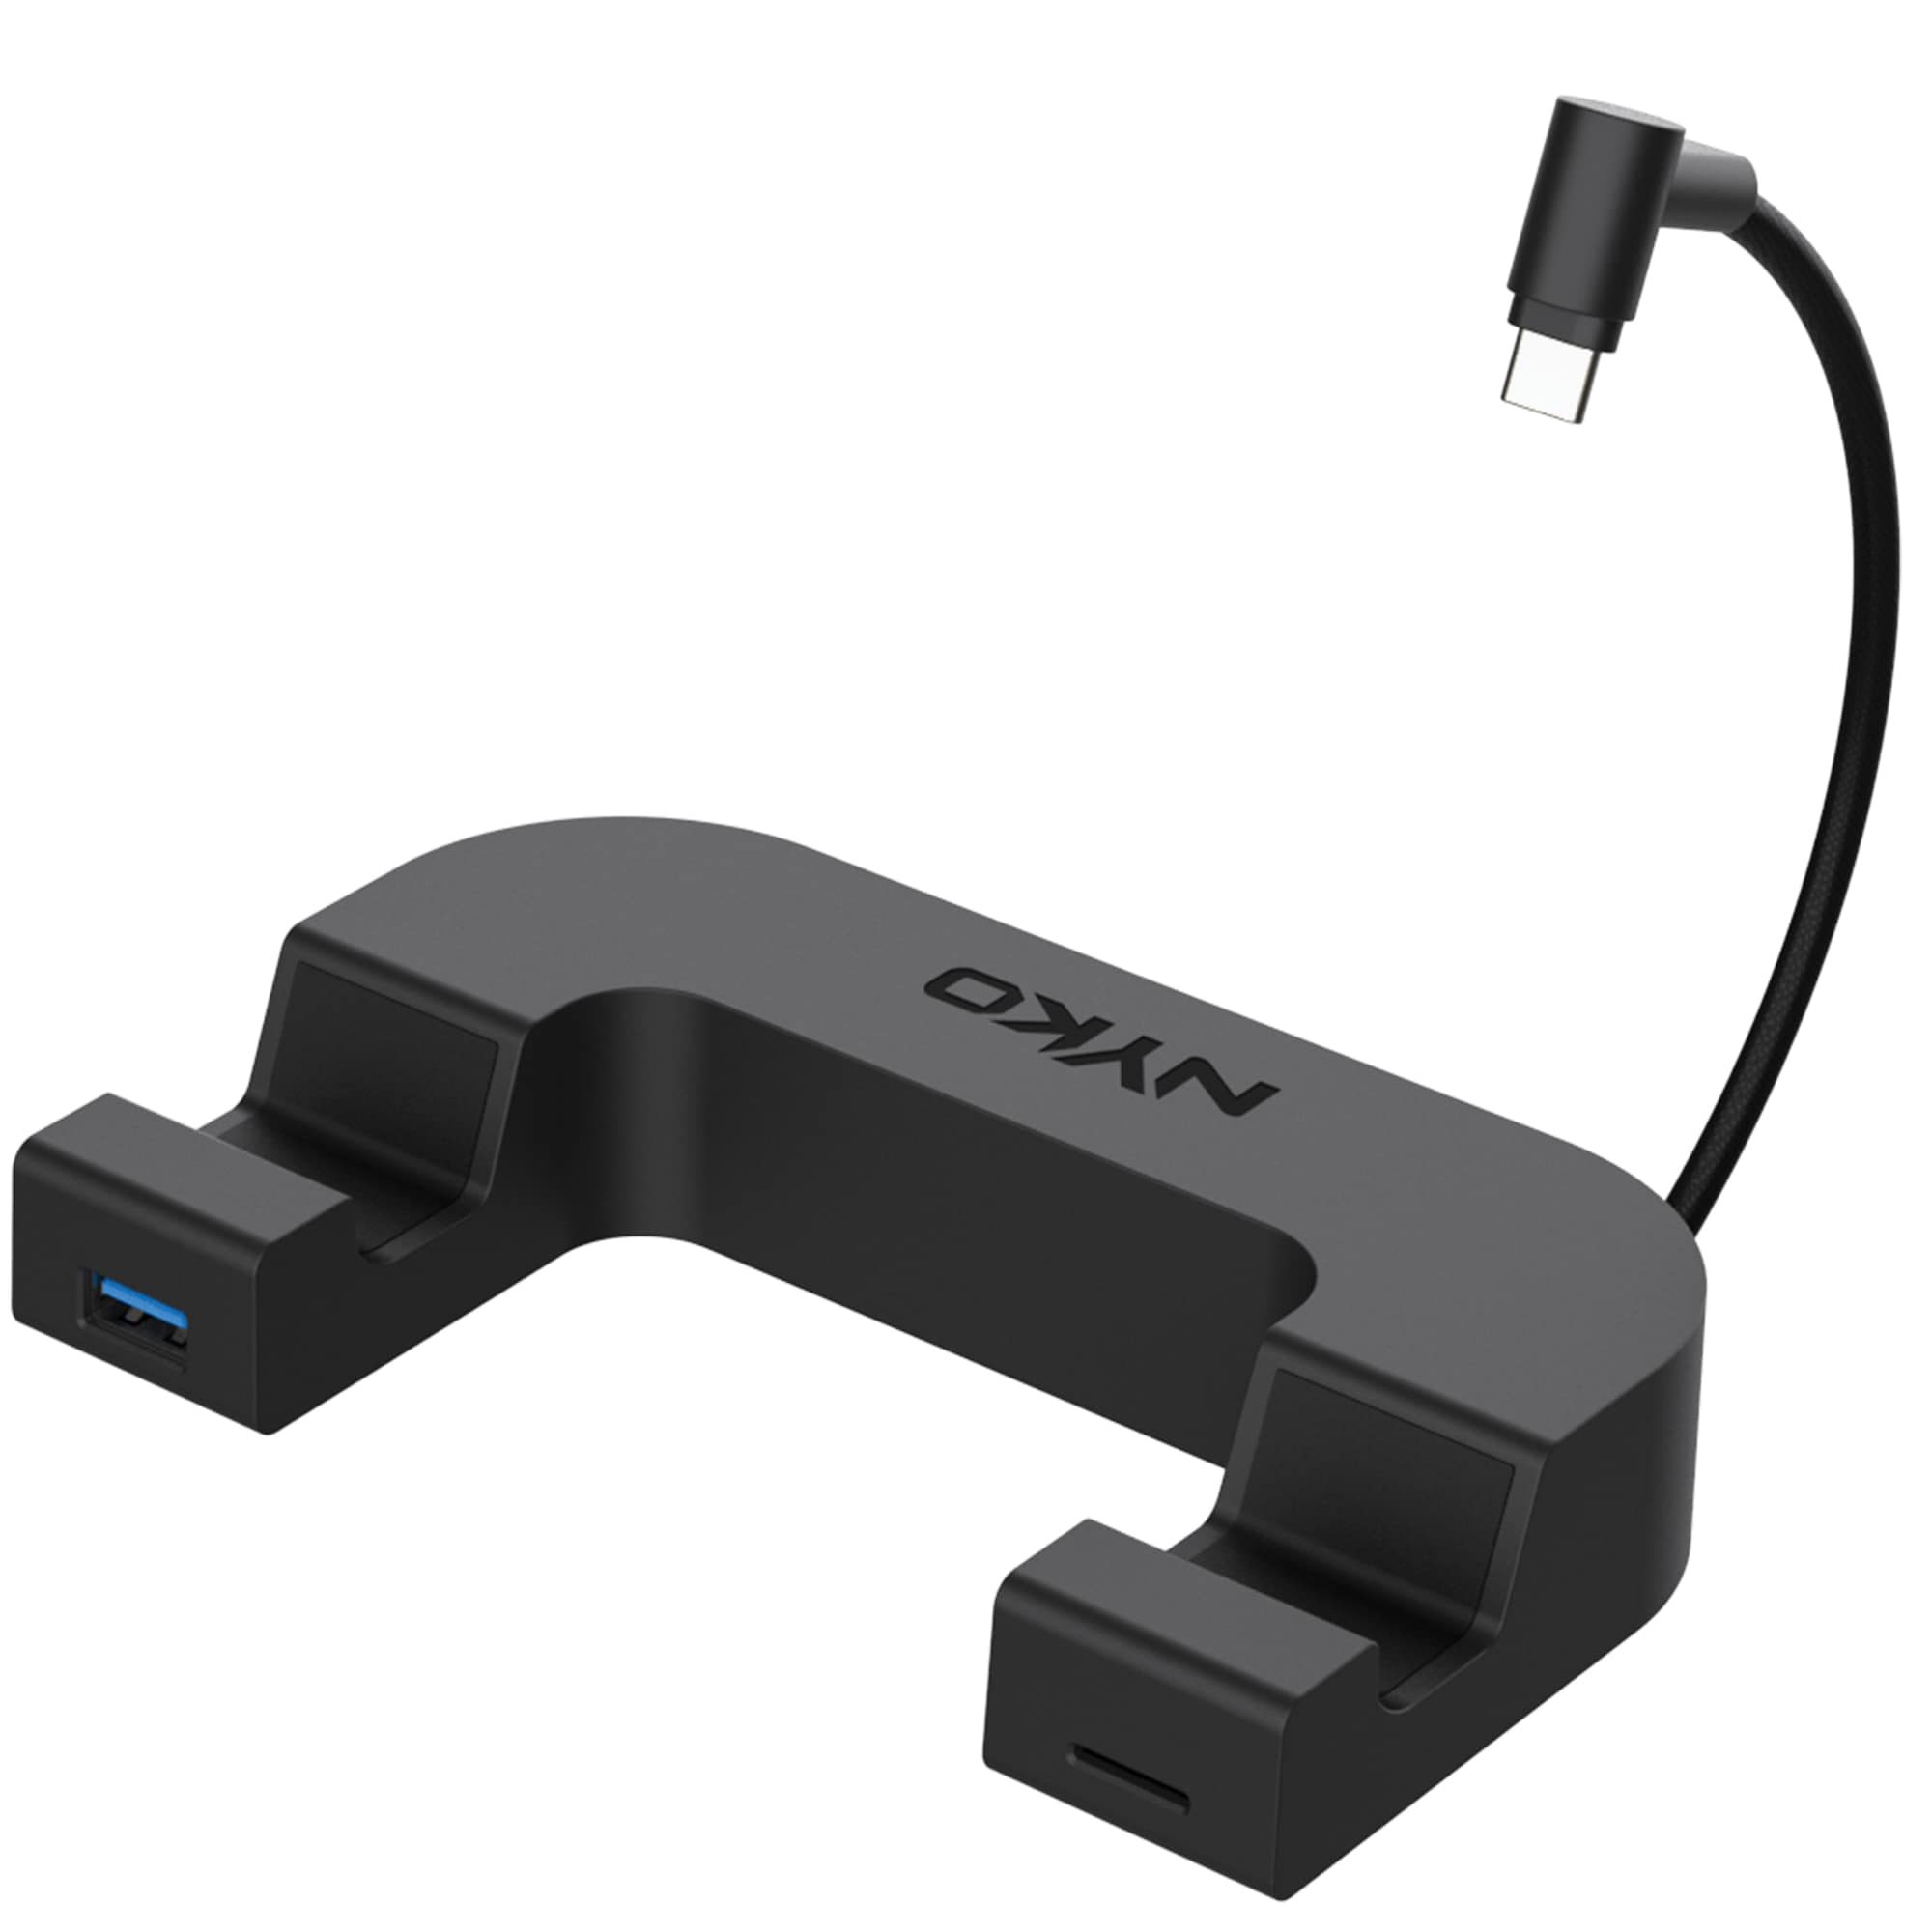 Charge Station for Nintendo Switch™ – Nyko Technologies